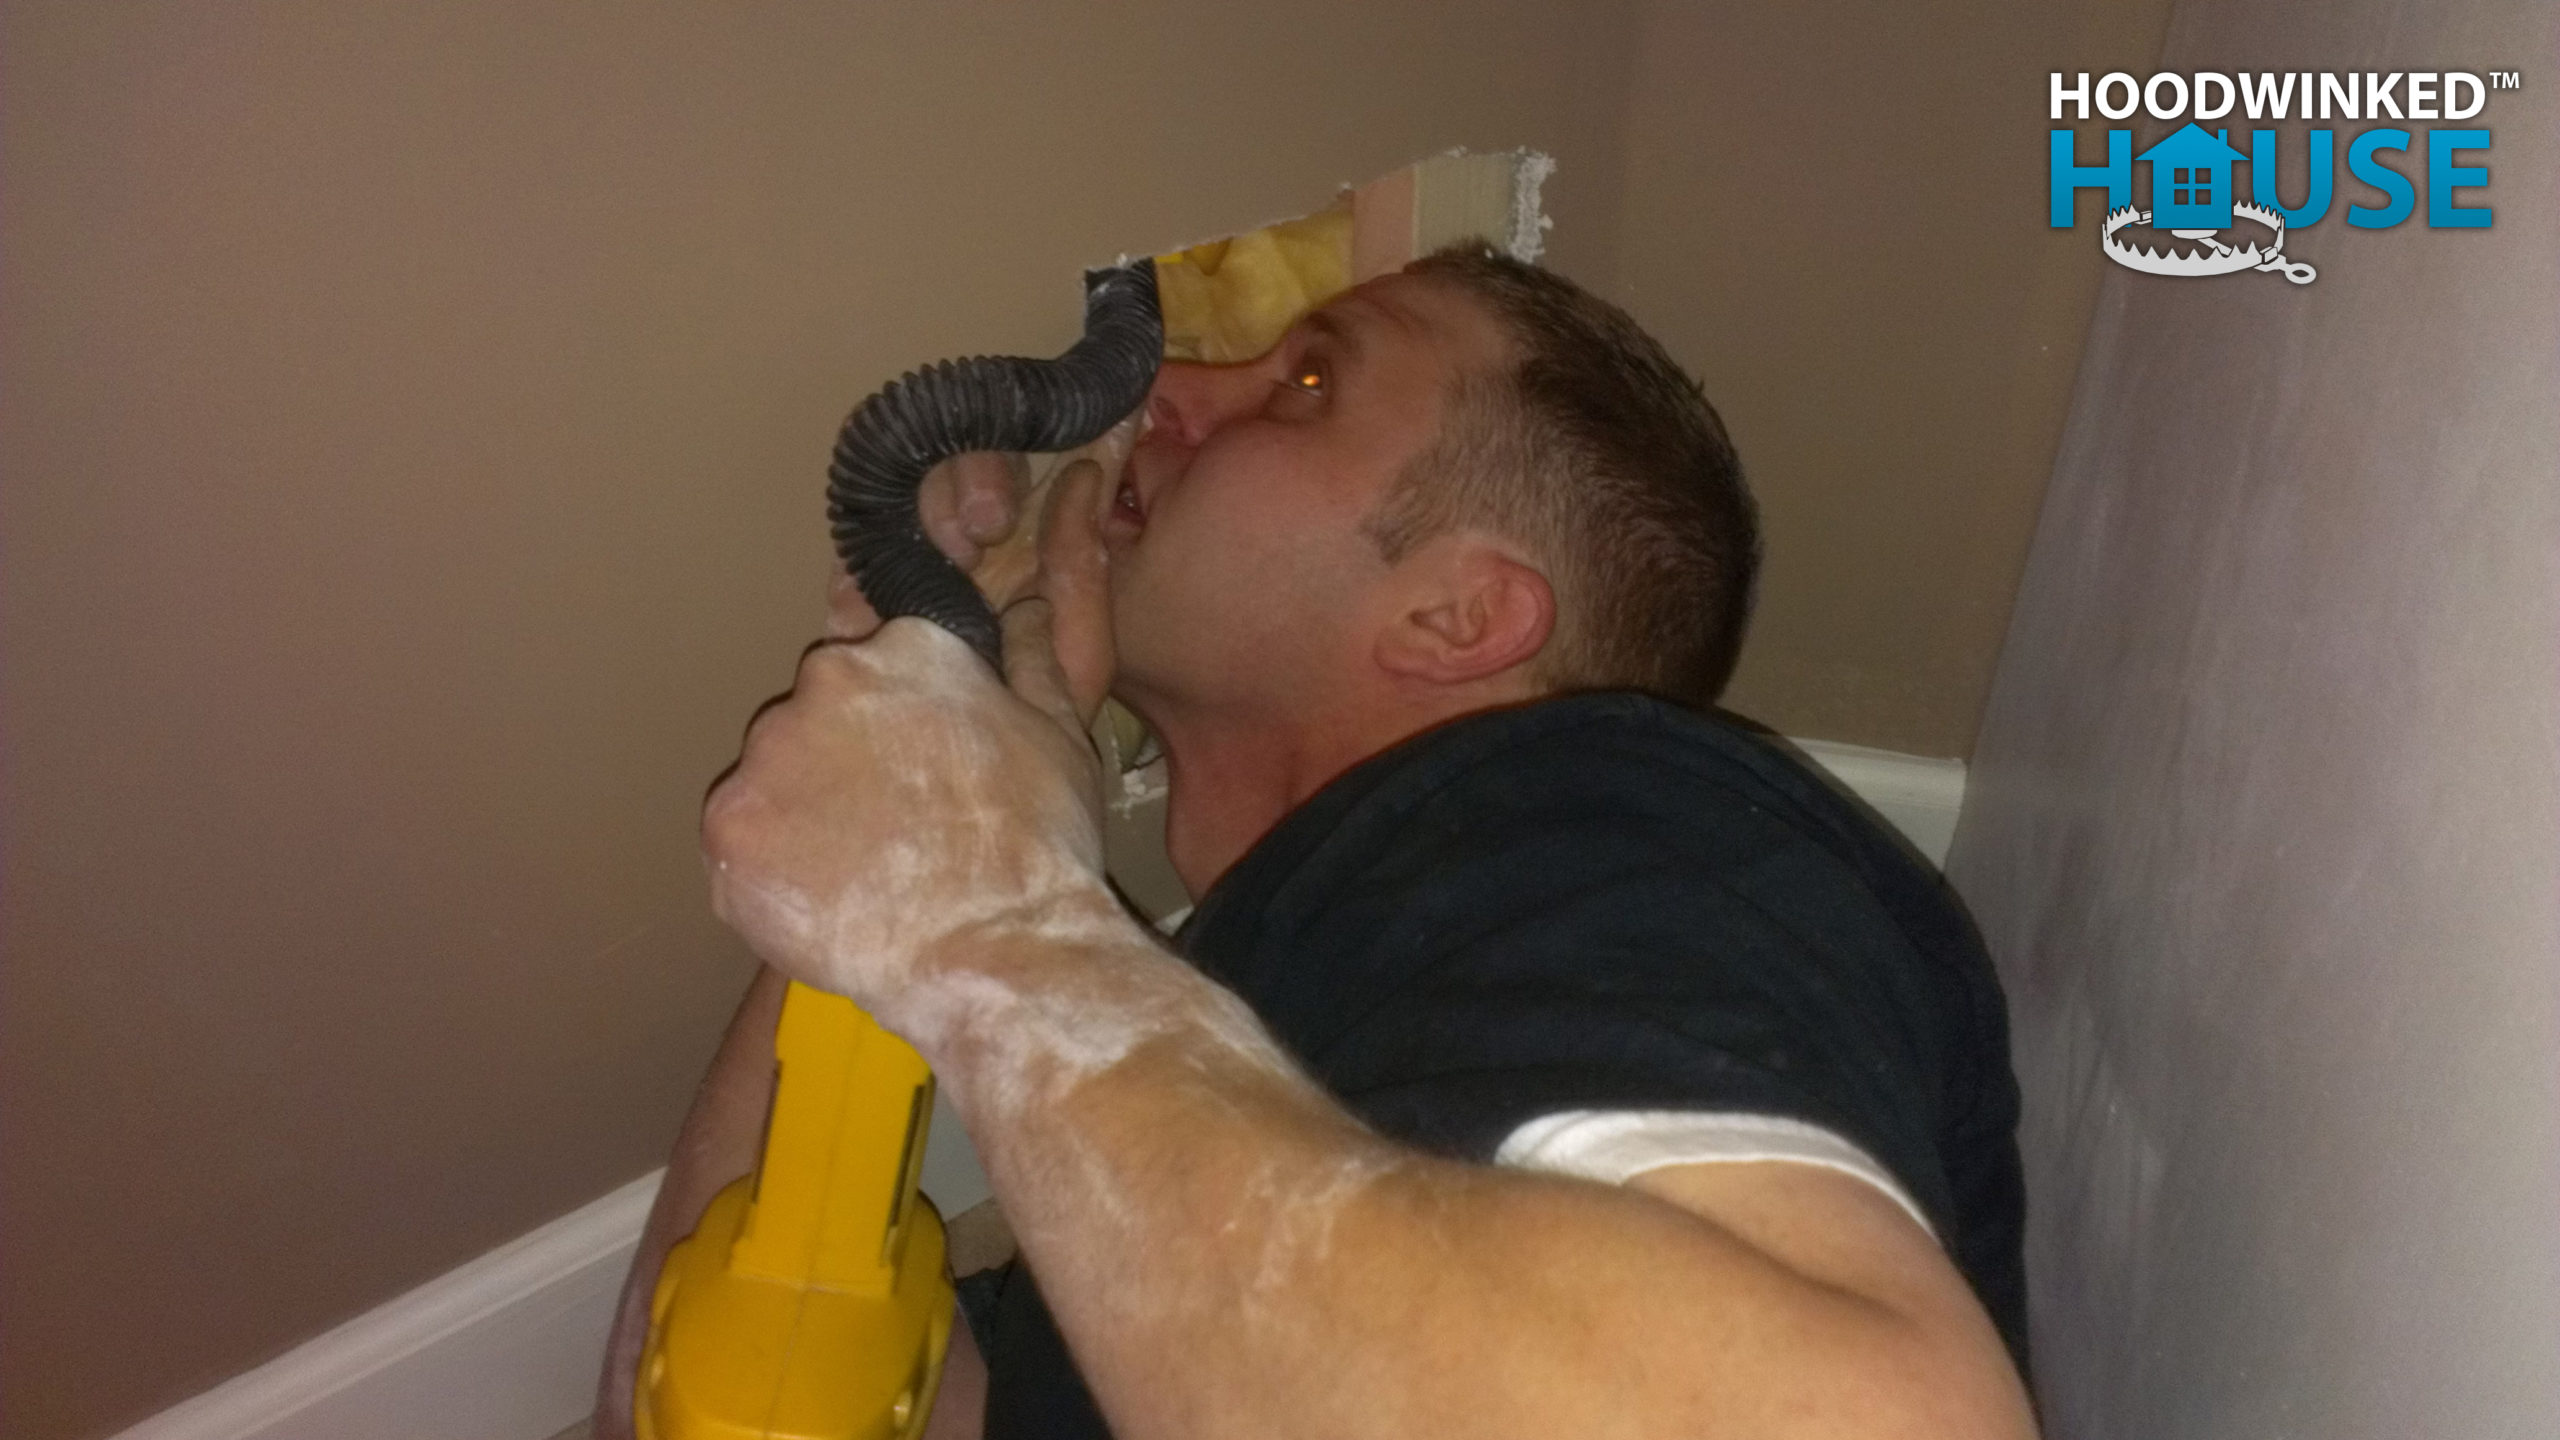 A plumber uses a flashlight to look through an inspection hole in drywall.